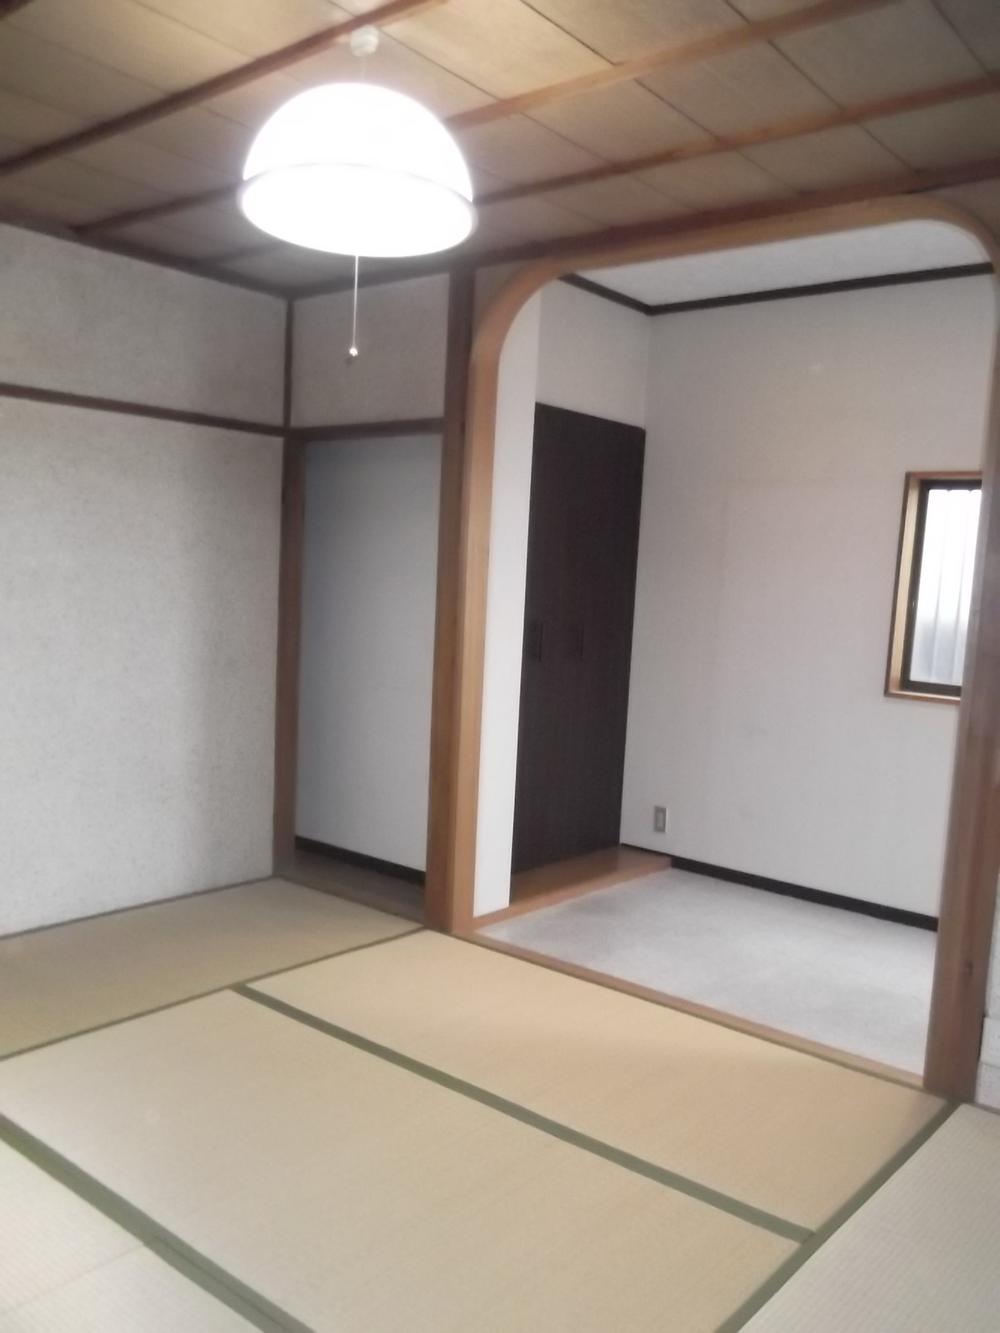 Other introspection. It is a clean Japanese-style room